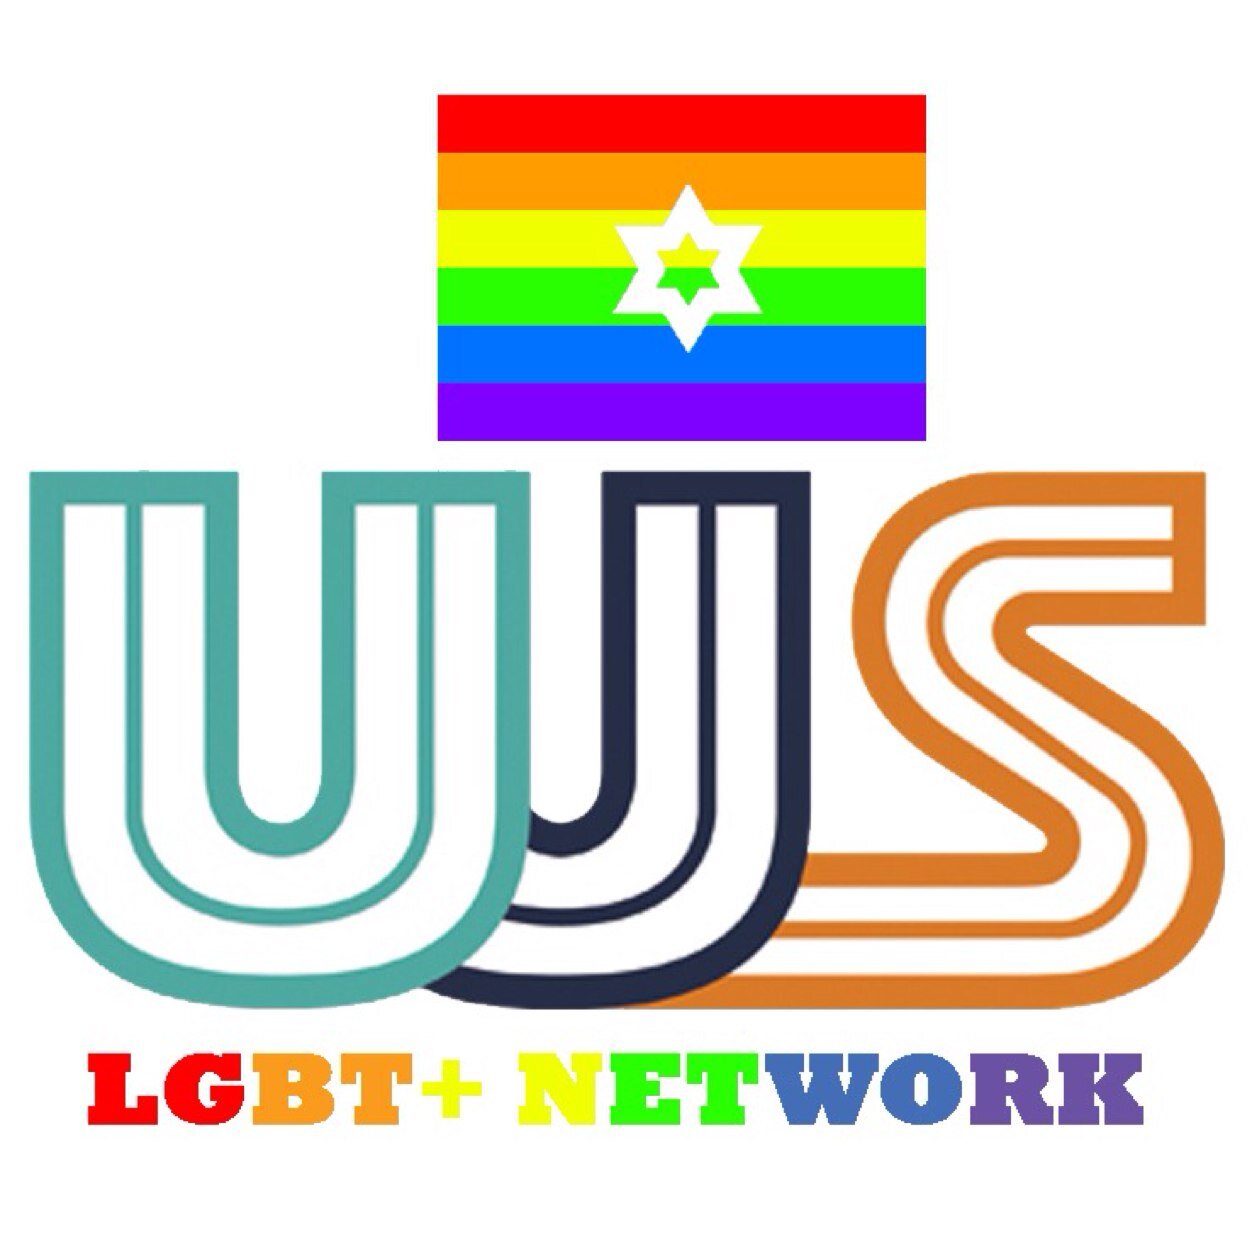 The official twitter of @UJS_UK LGBT+ (Union of Jewish Students LGBT+ Network). The membership organisation for LGBT+ Jewish students in the UK and Ireland.